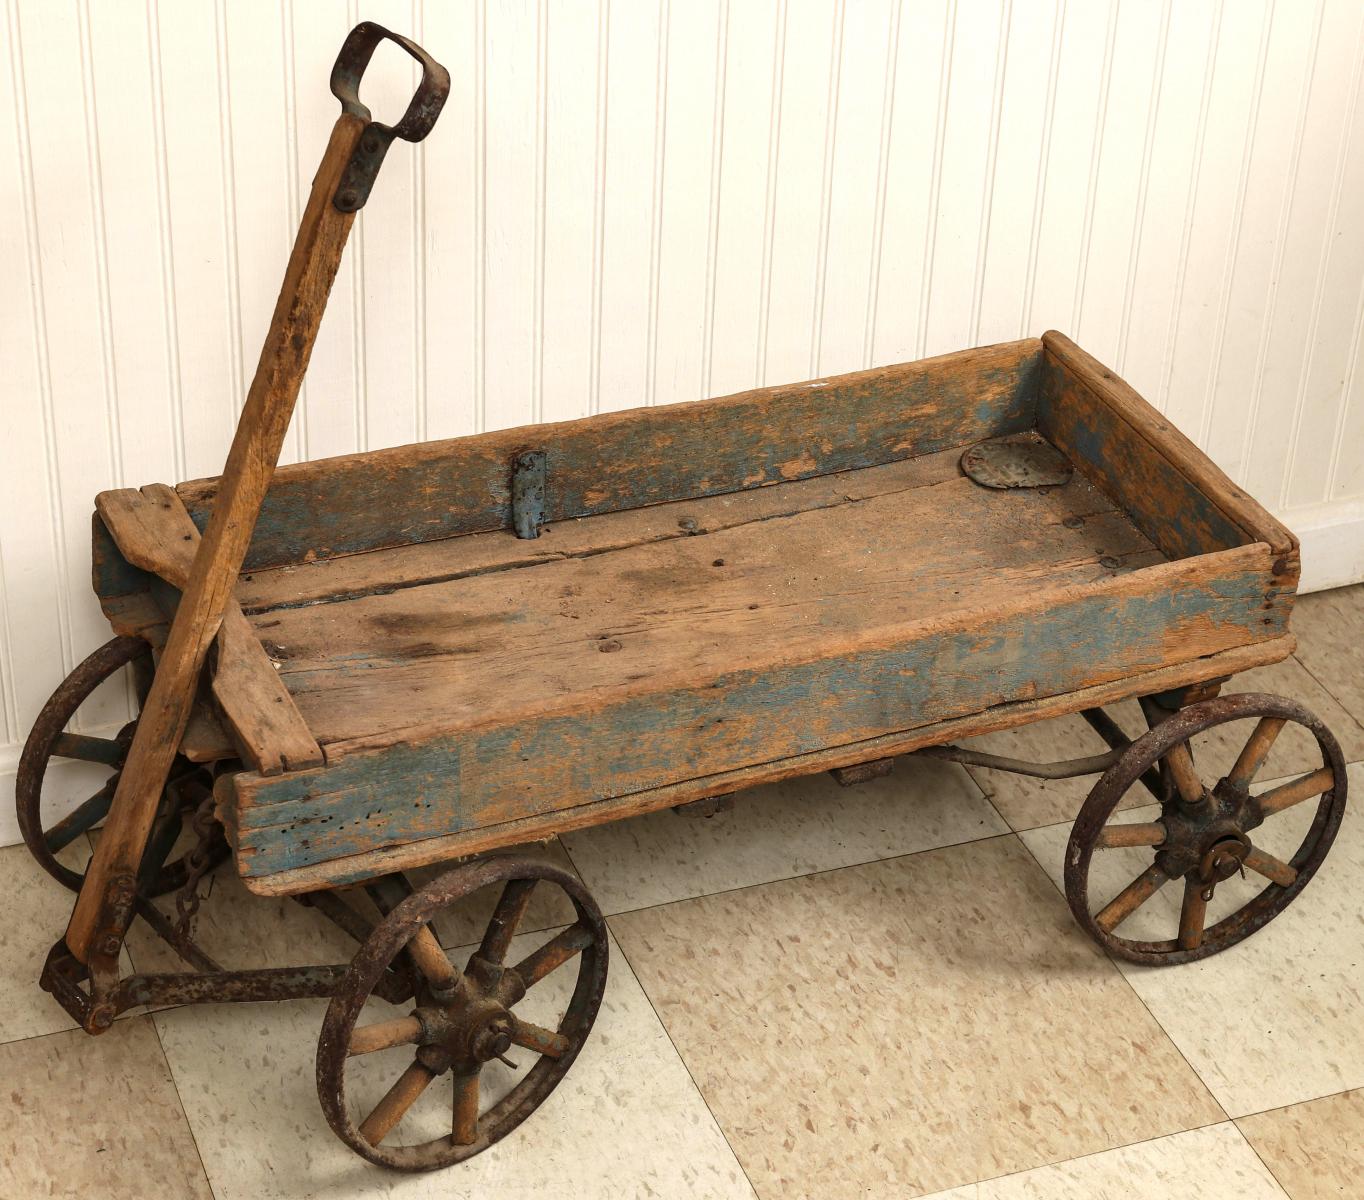 A 1900s IRON WHEELED COASTER WAGON IN OLD PAINT